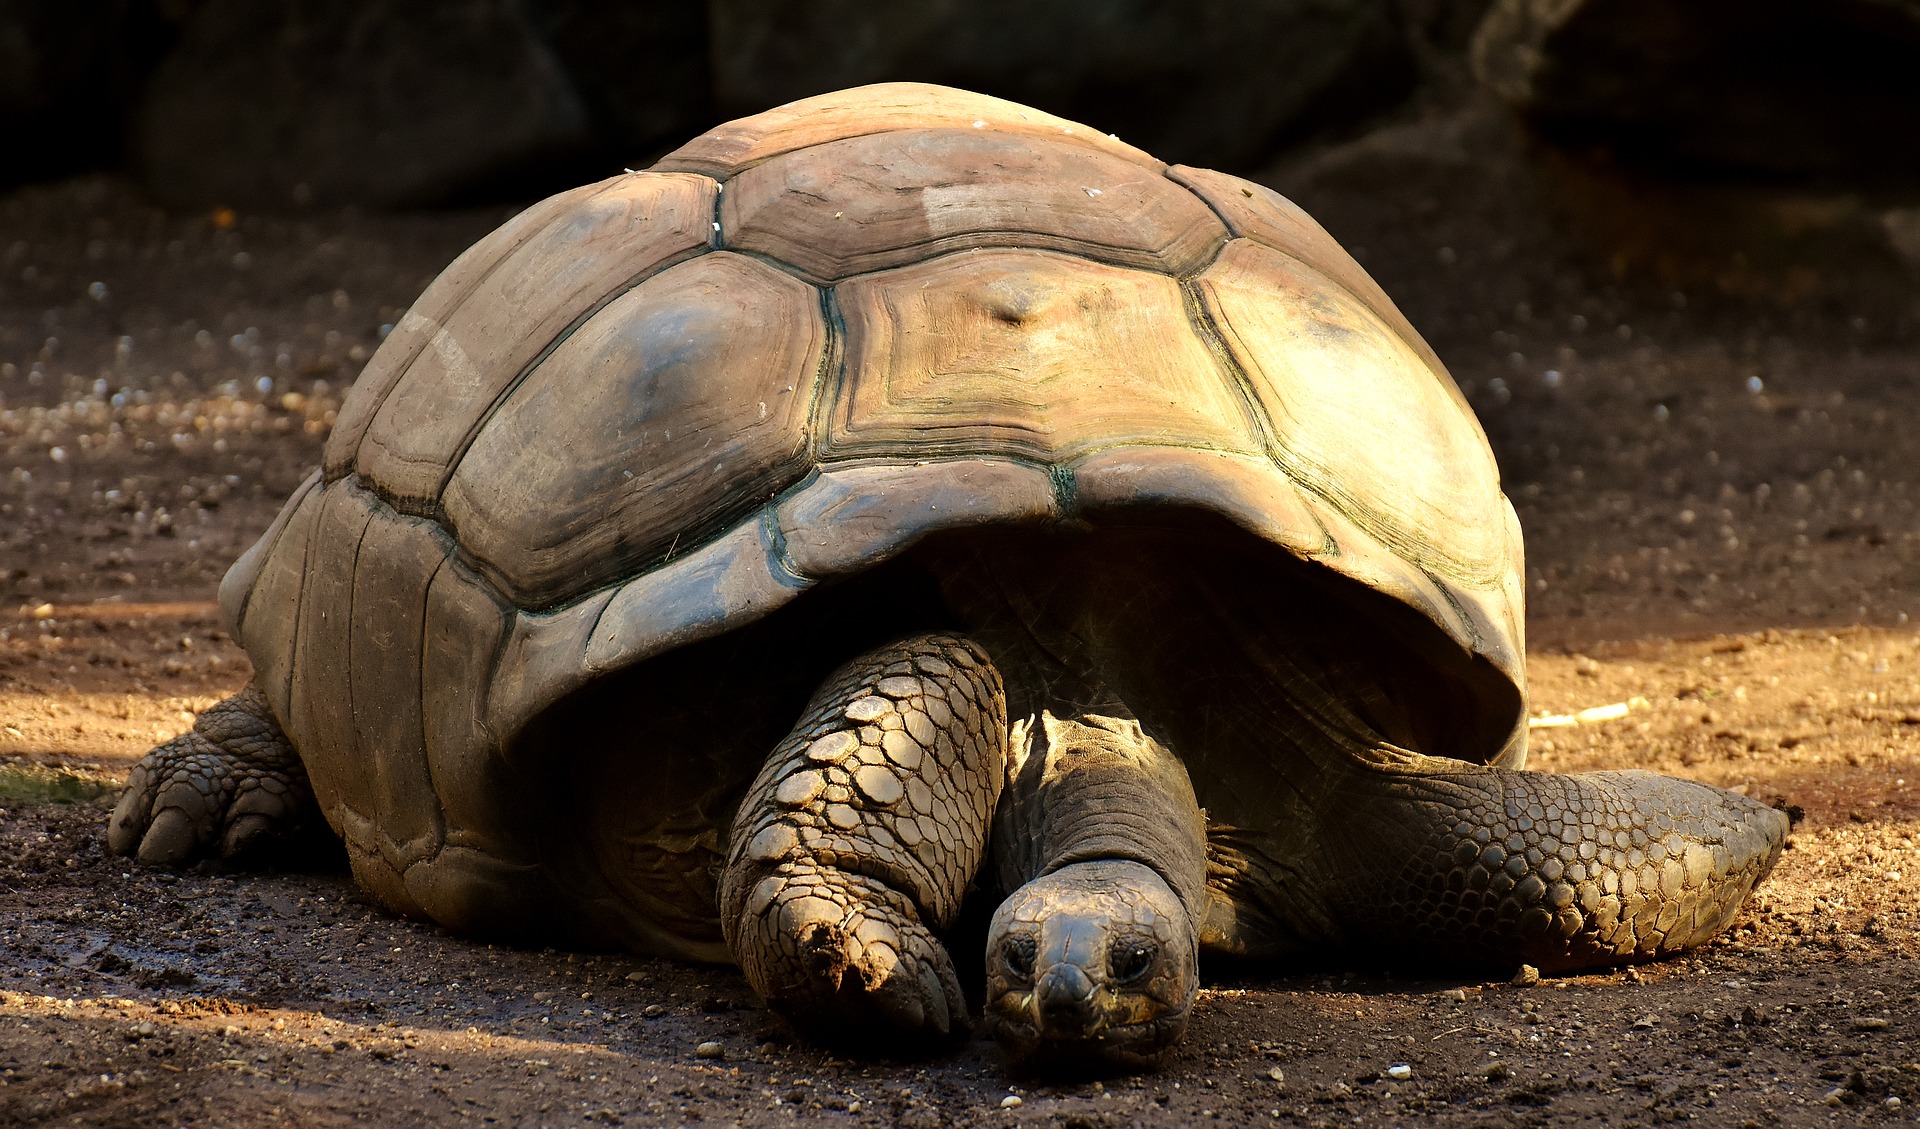 It took 300 years to name the Giant Tortoise